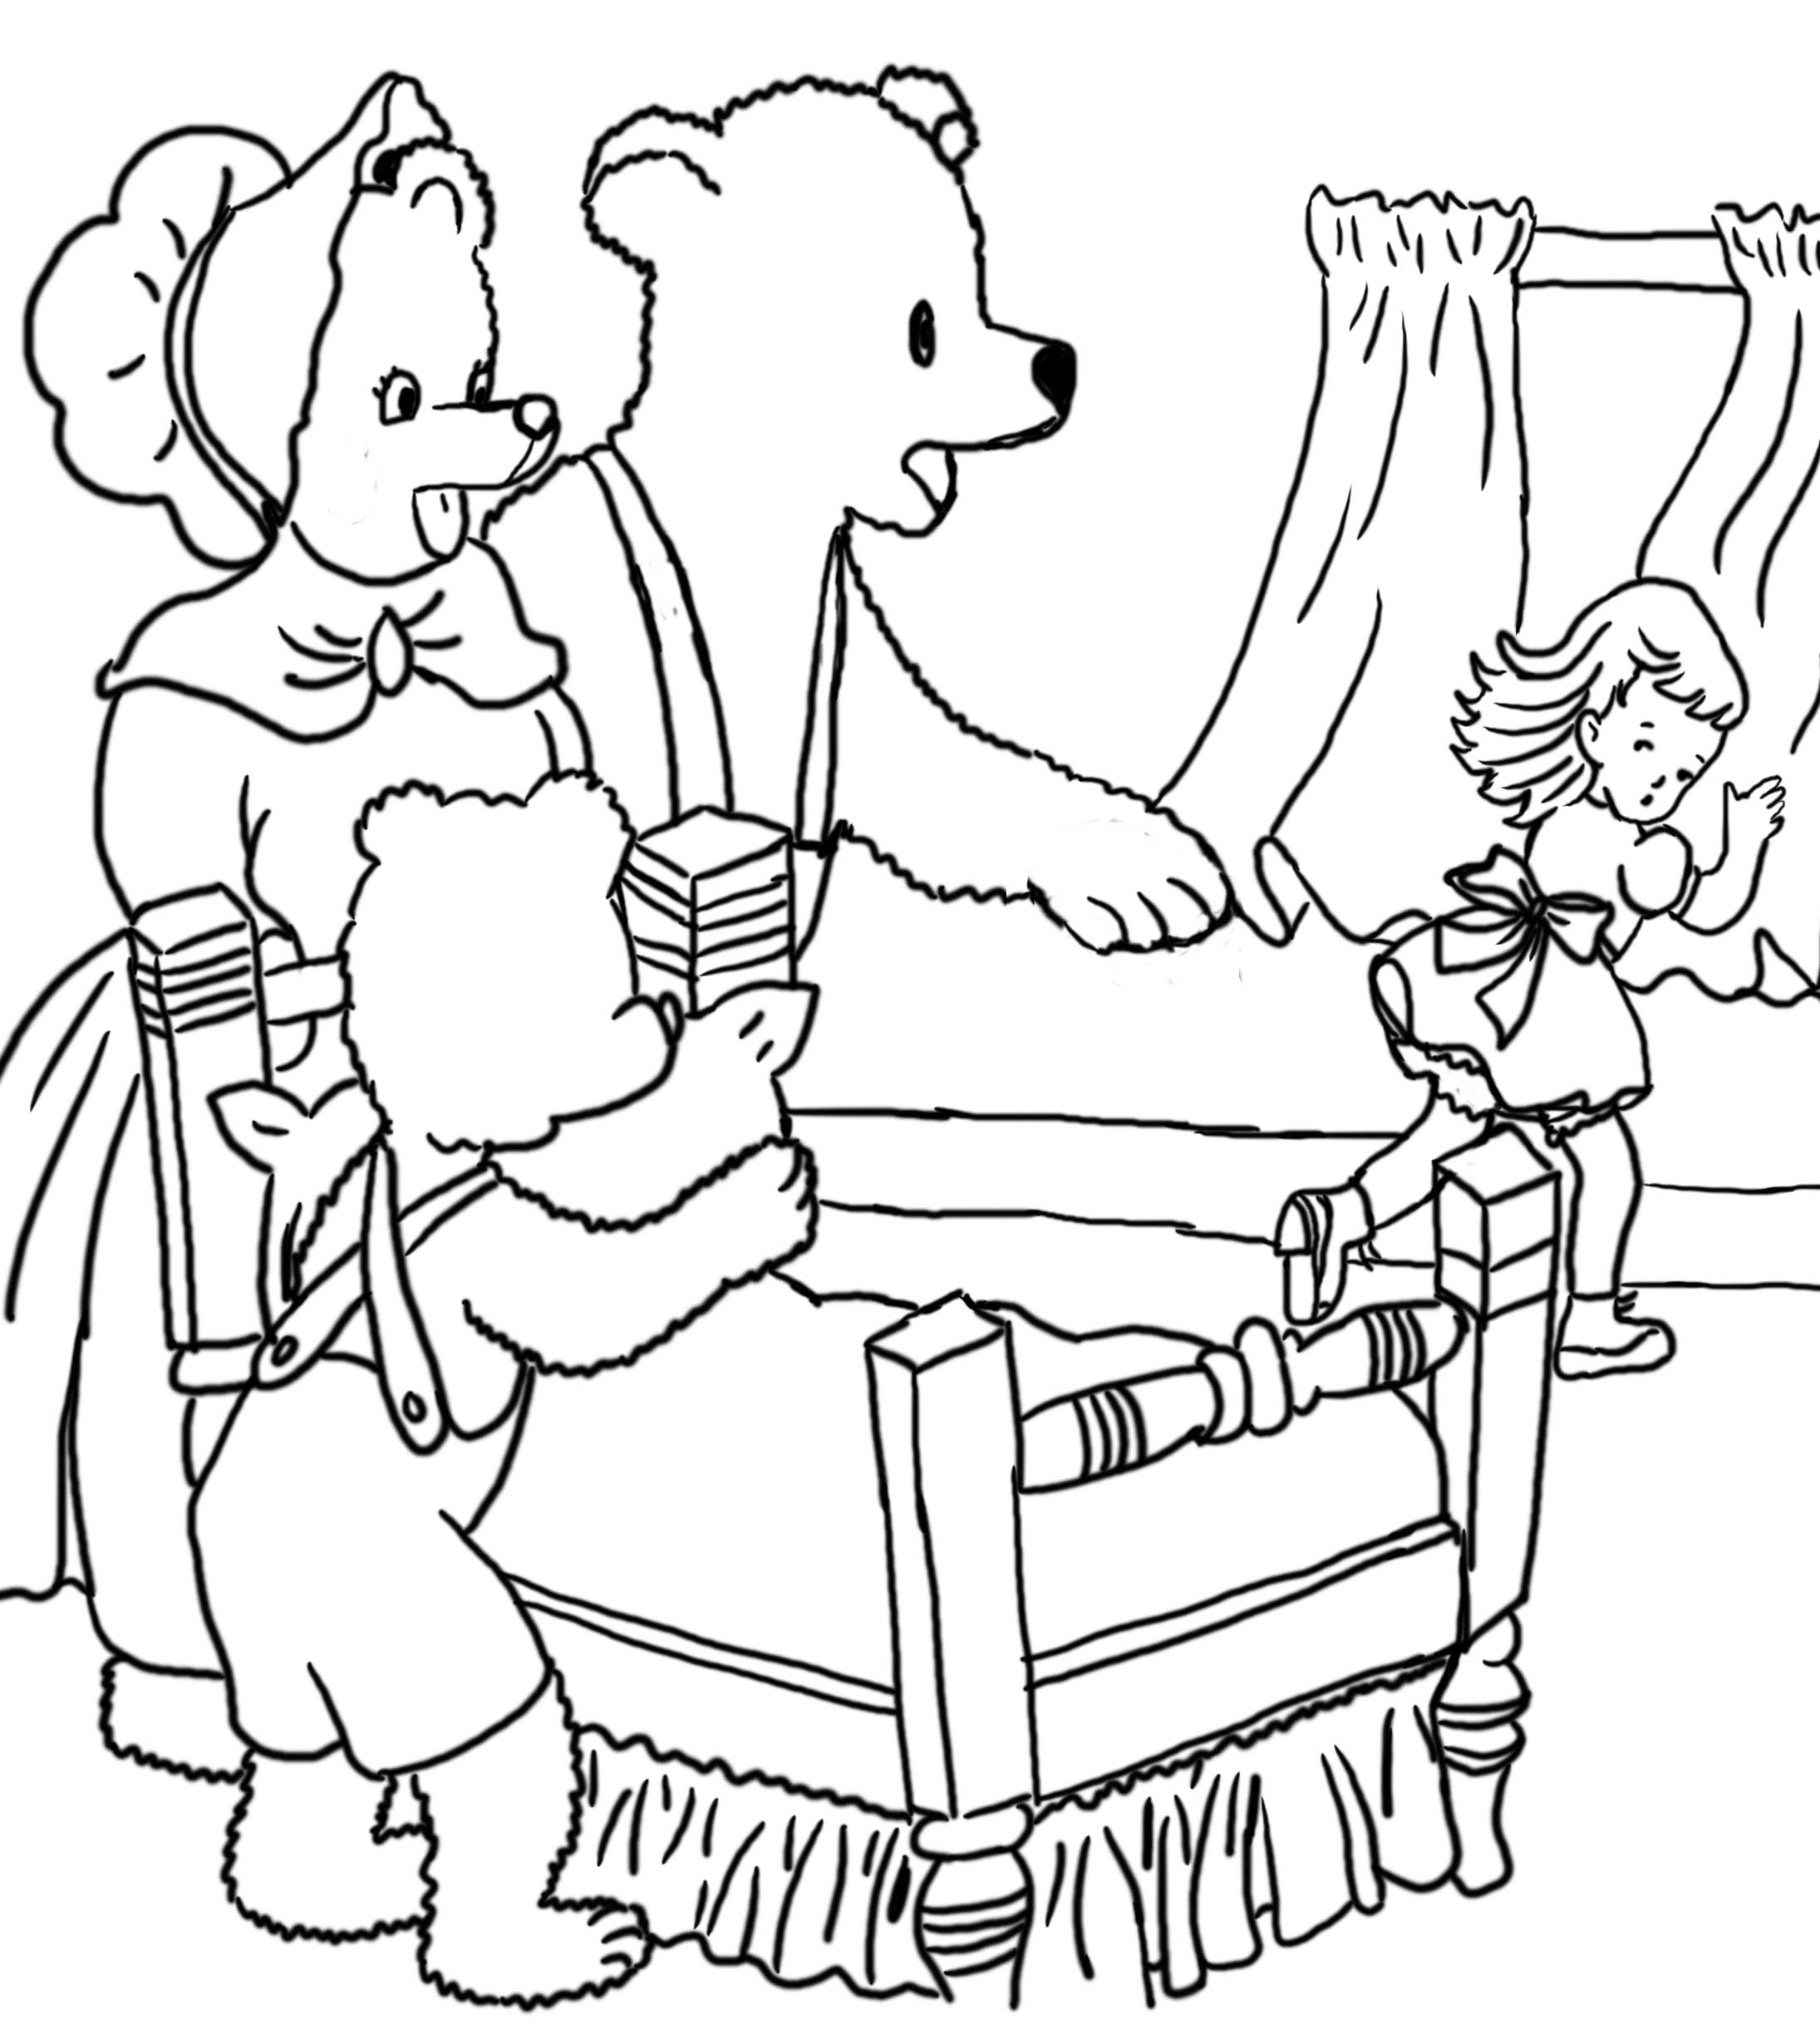 goldilocks-and-the-three-bears-coloring-page-at-getdrawings-free-download